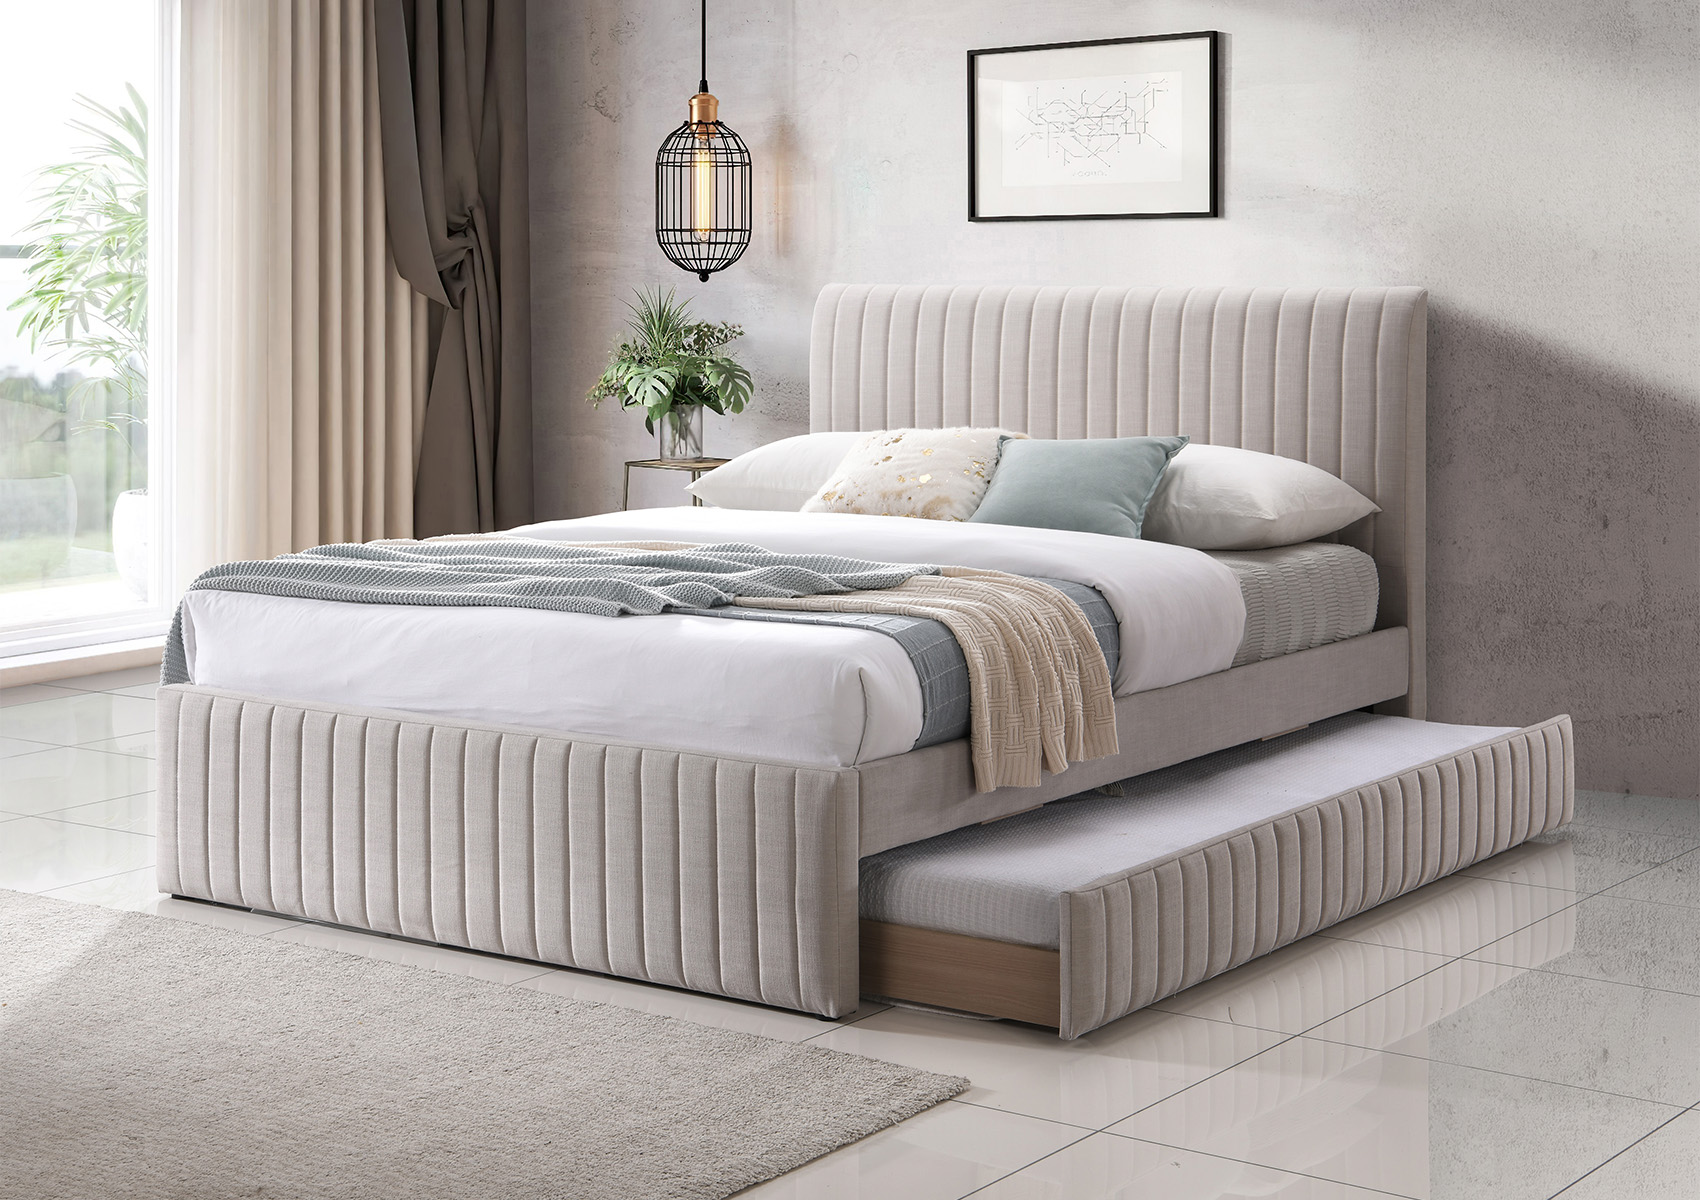 View Bexley Natural Oat Upholstered Bed Frame Only Time4Sleep information